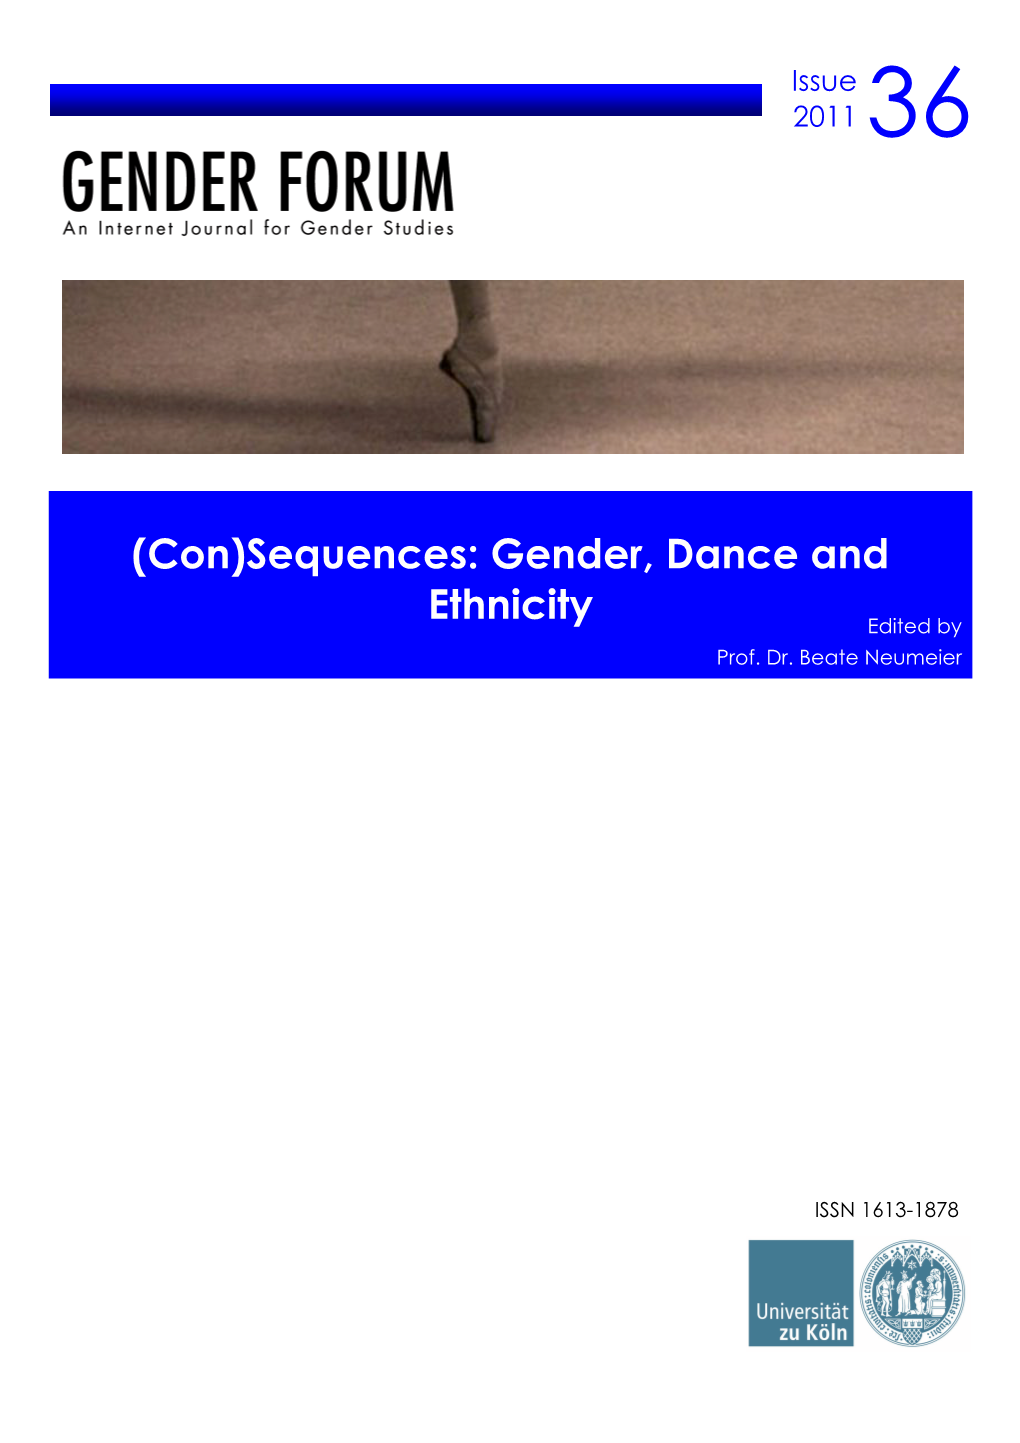 (Con)Sequences: Gender, Dance and Ethnicity